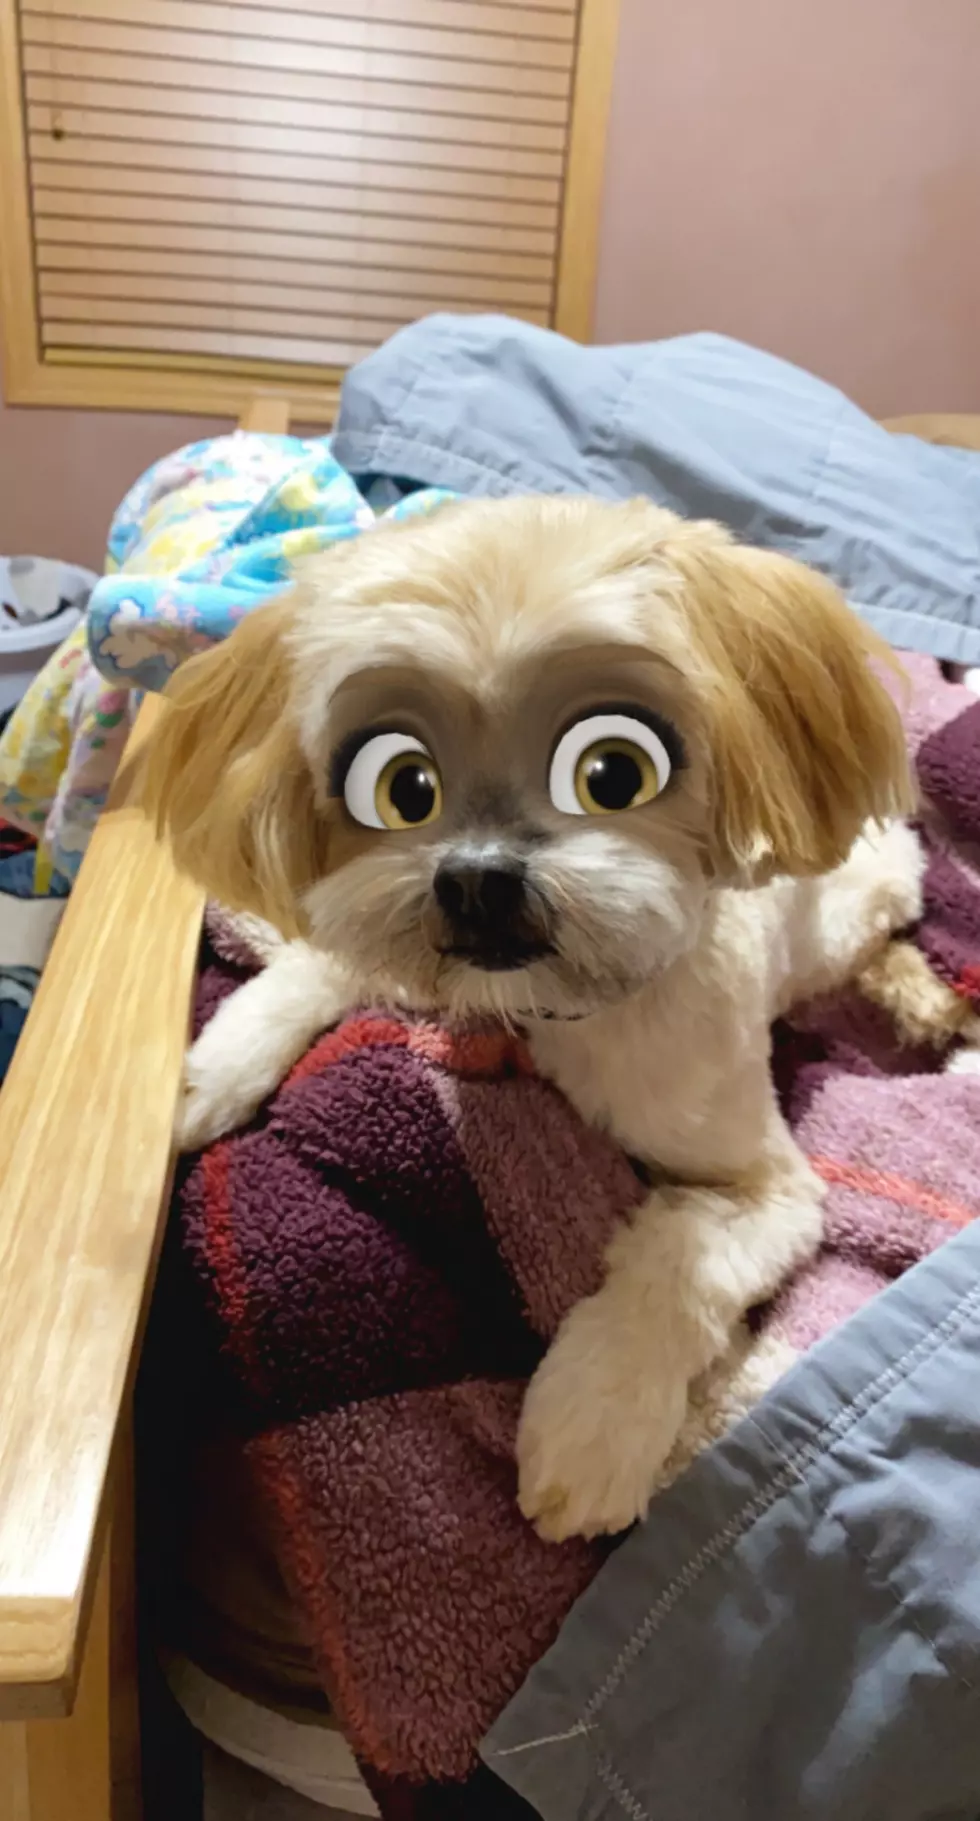 This Snapchat Filter Makes Your Dog Look Like a Disney Character